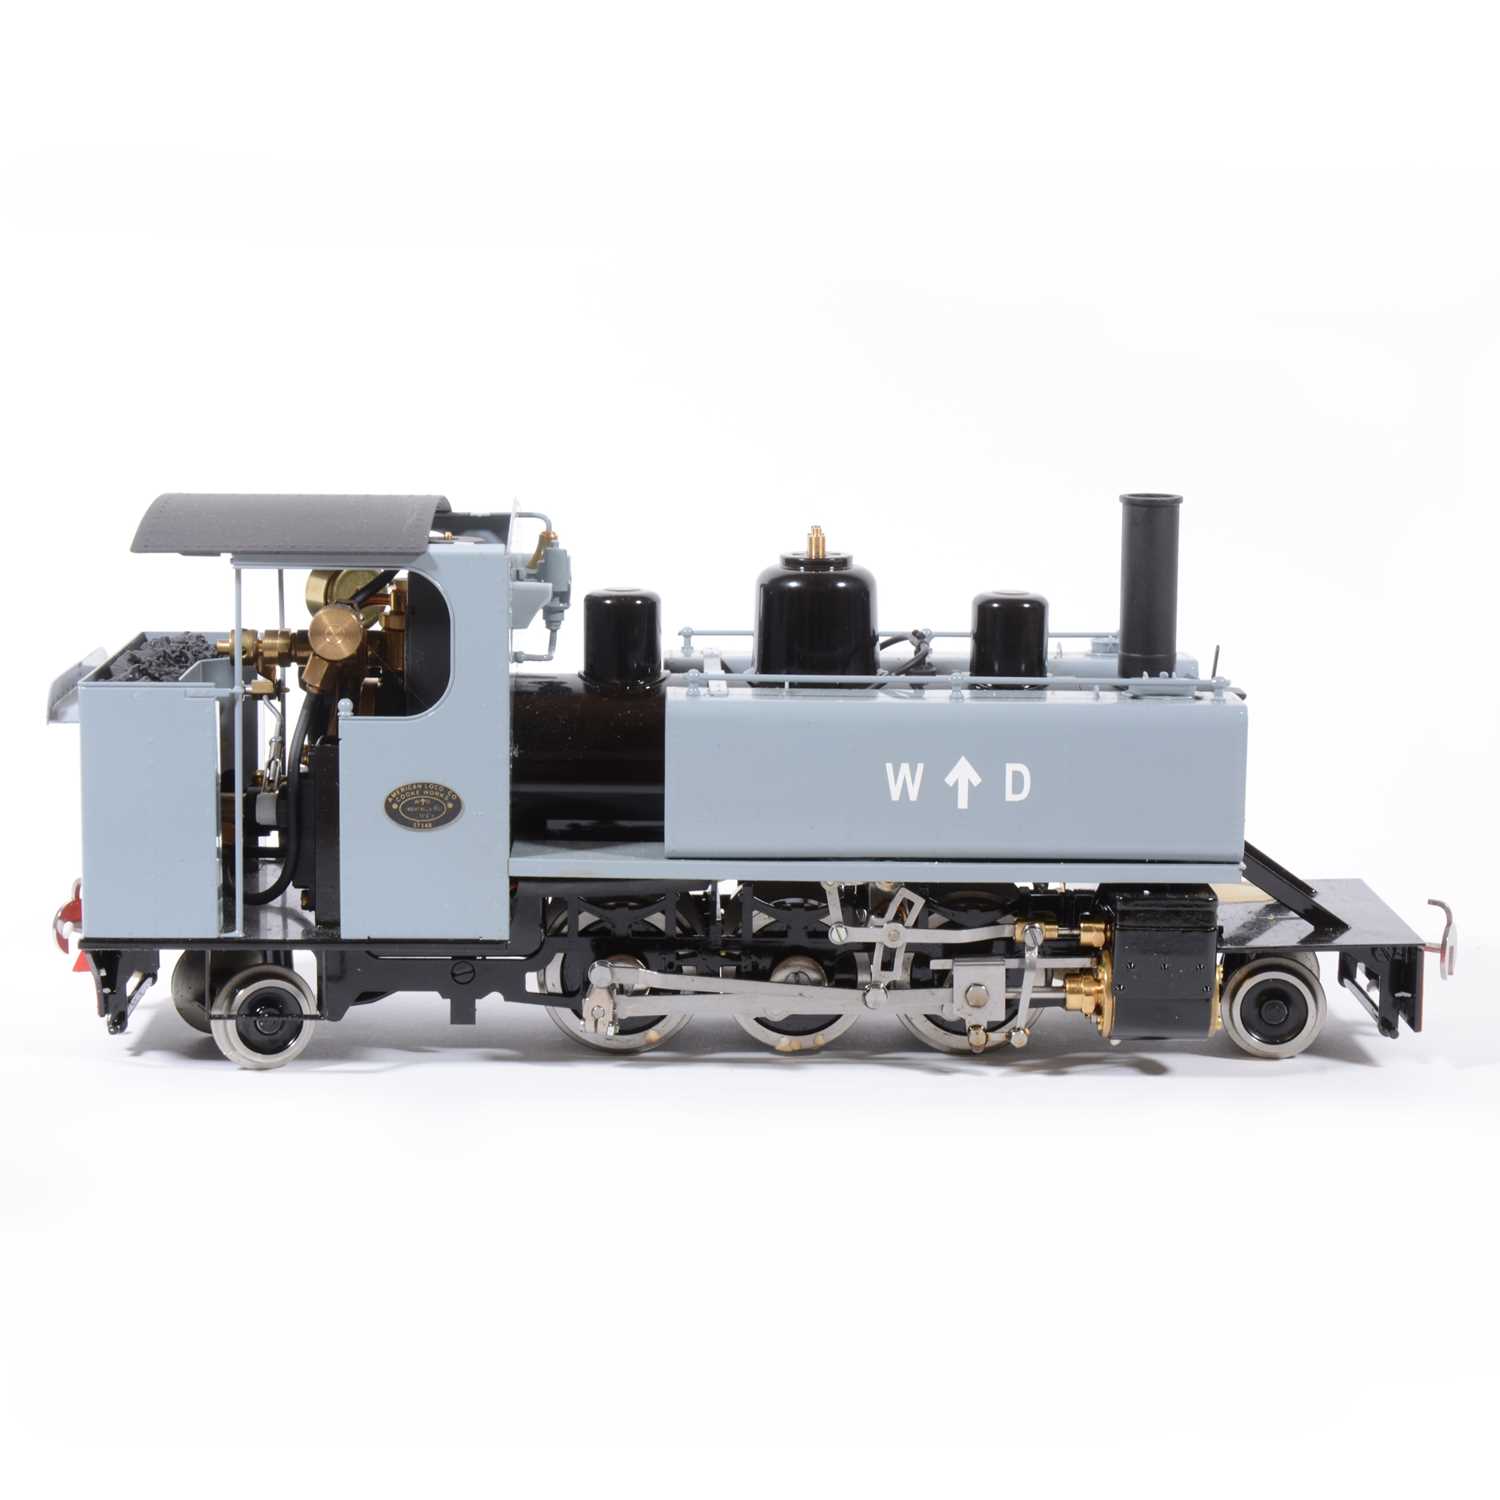 Lot 28 - Roundhouse live steam, gauge 1 / G scale, 45mm locomotive, WD Alco 2-6-2T, grey, boxed, with RC.